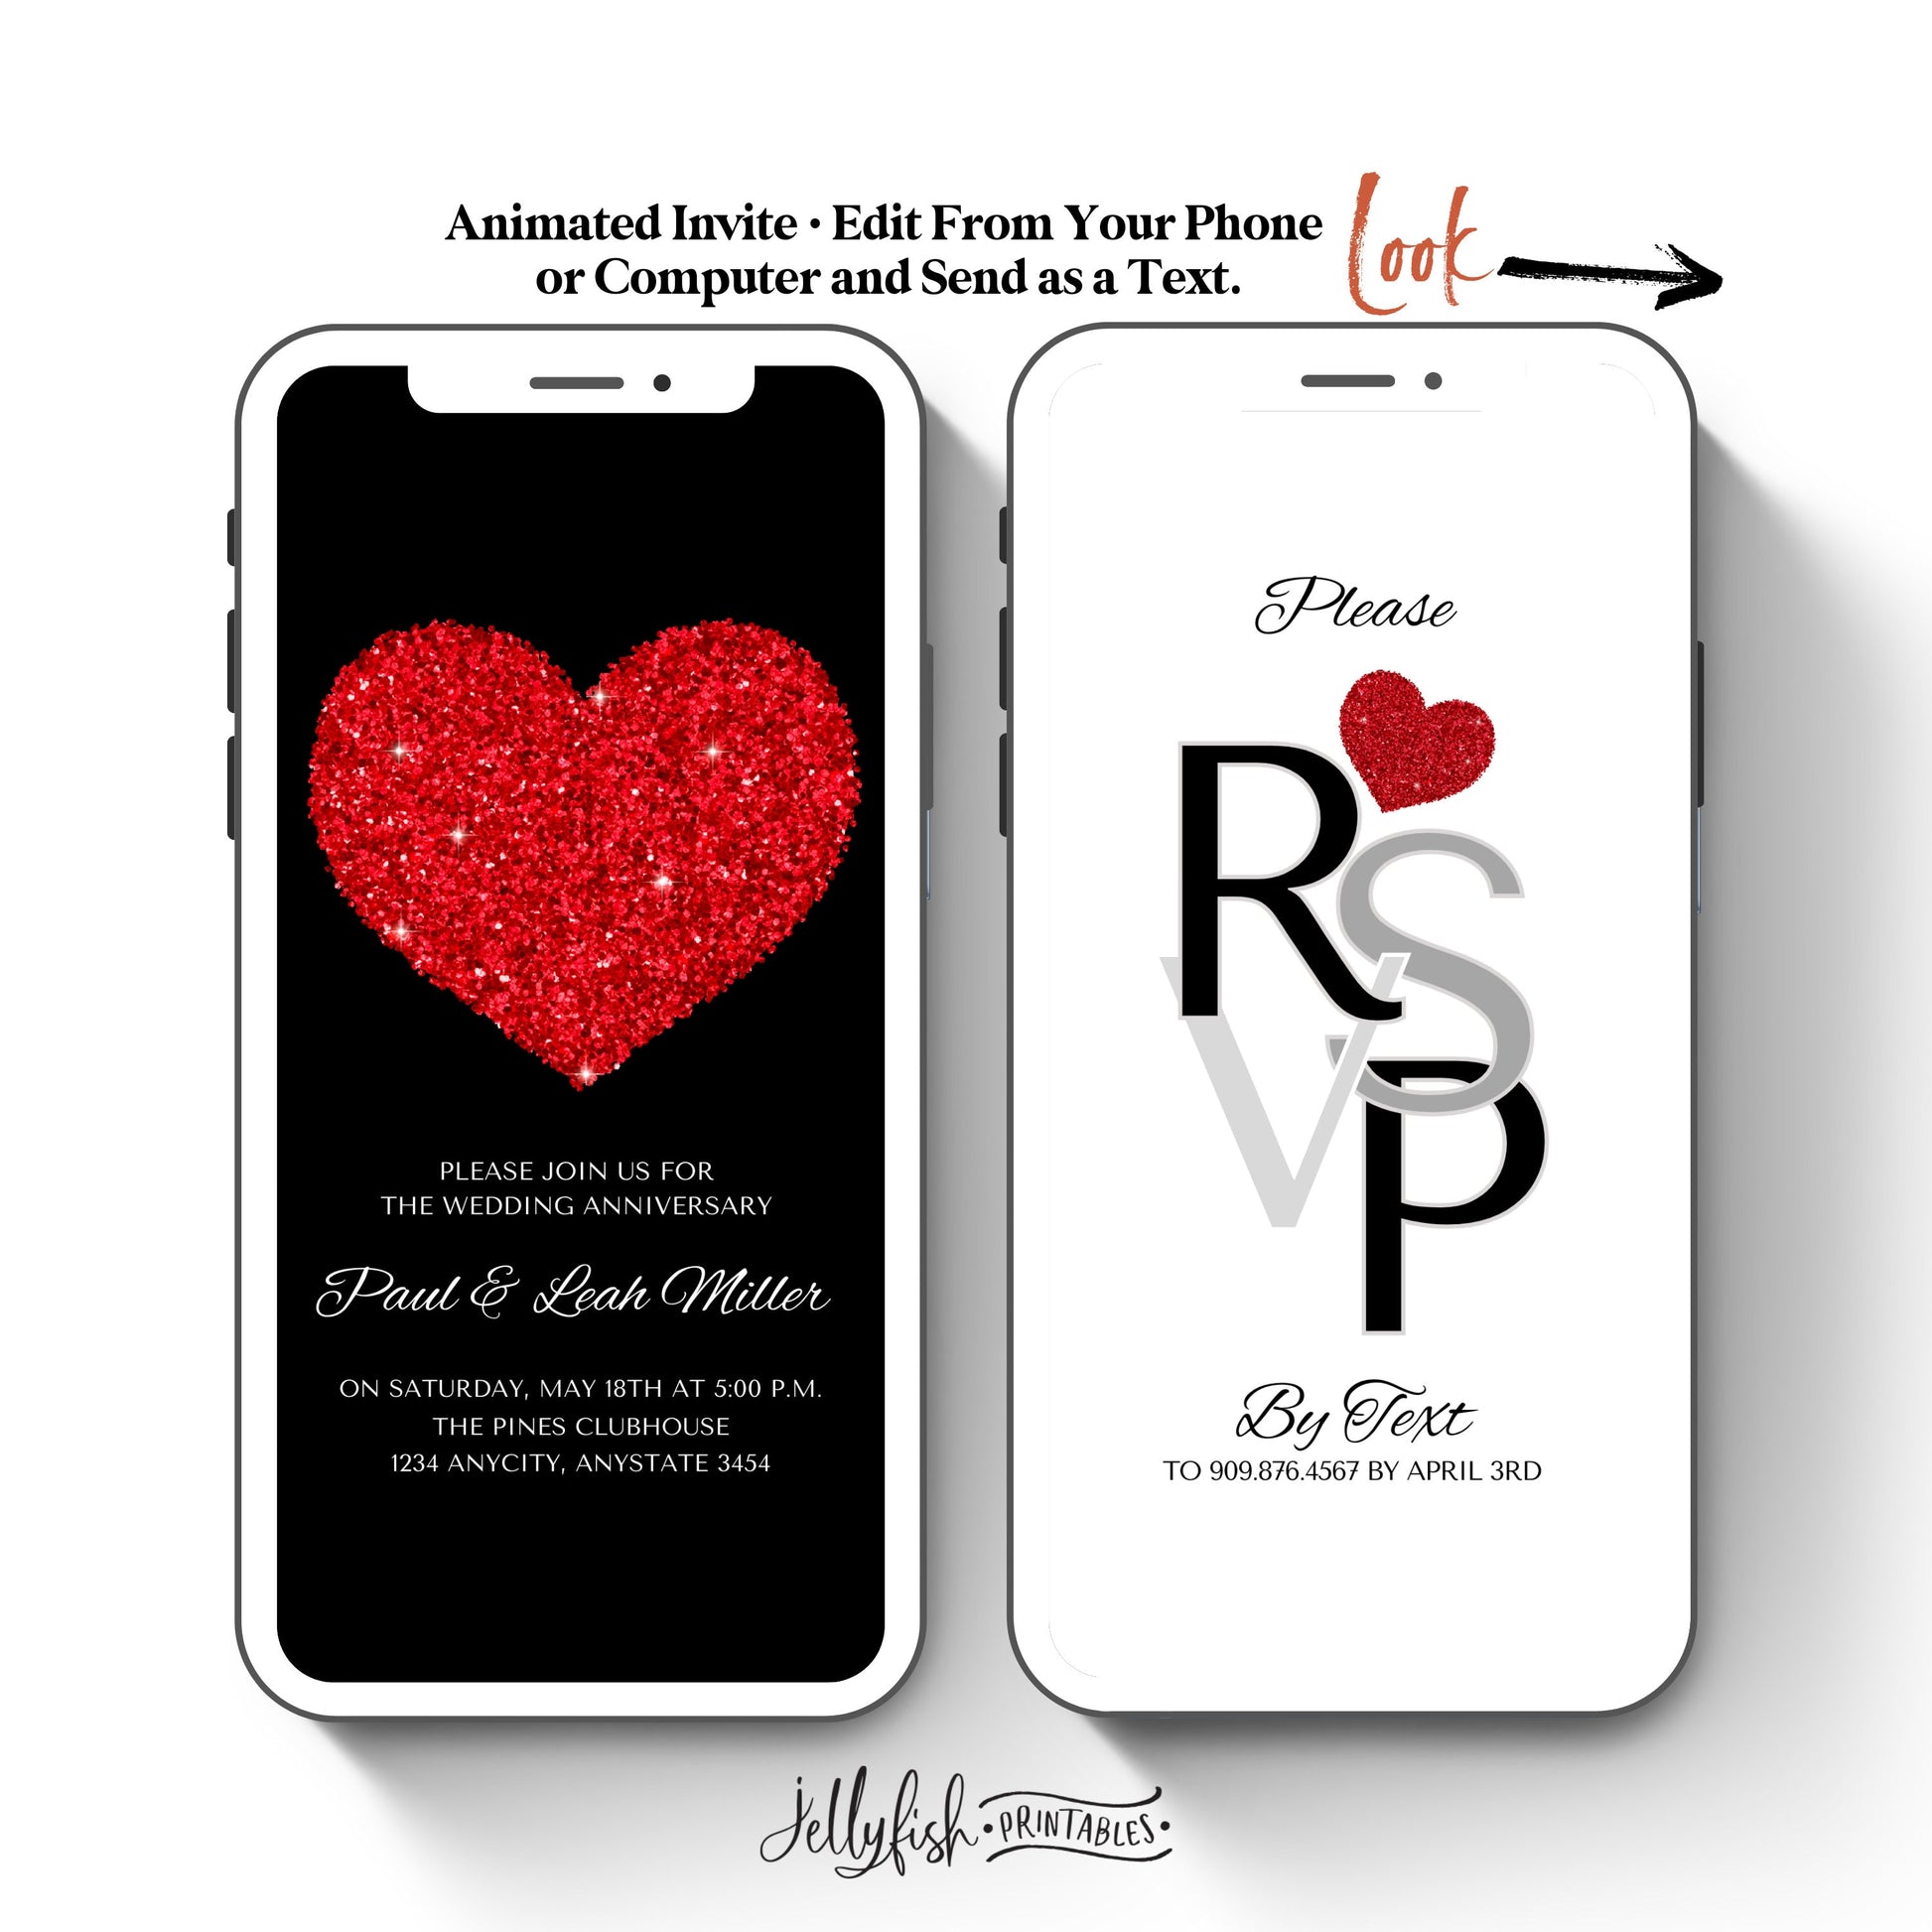 Red Heart Anniversary Video Invitation Template. Send Today